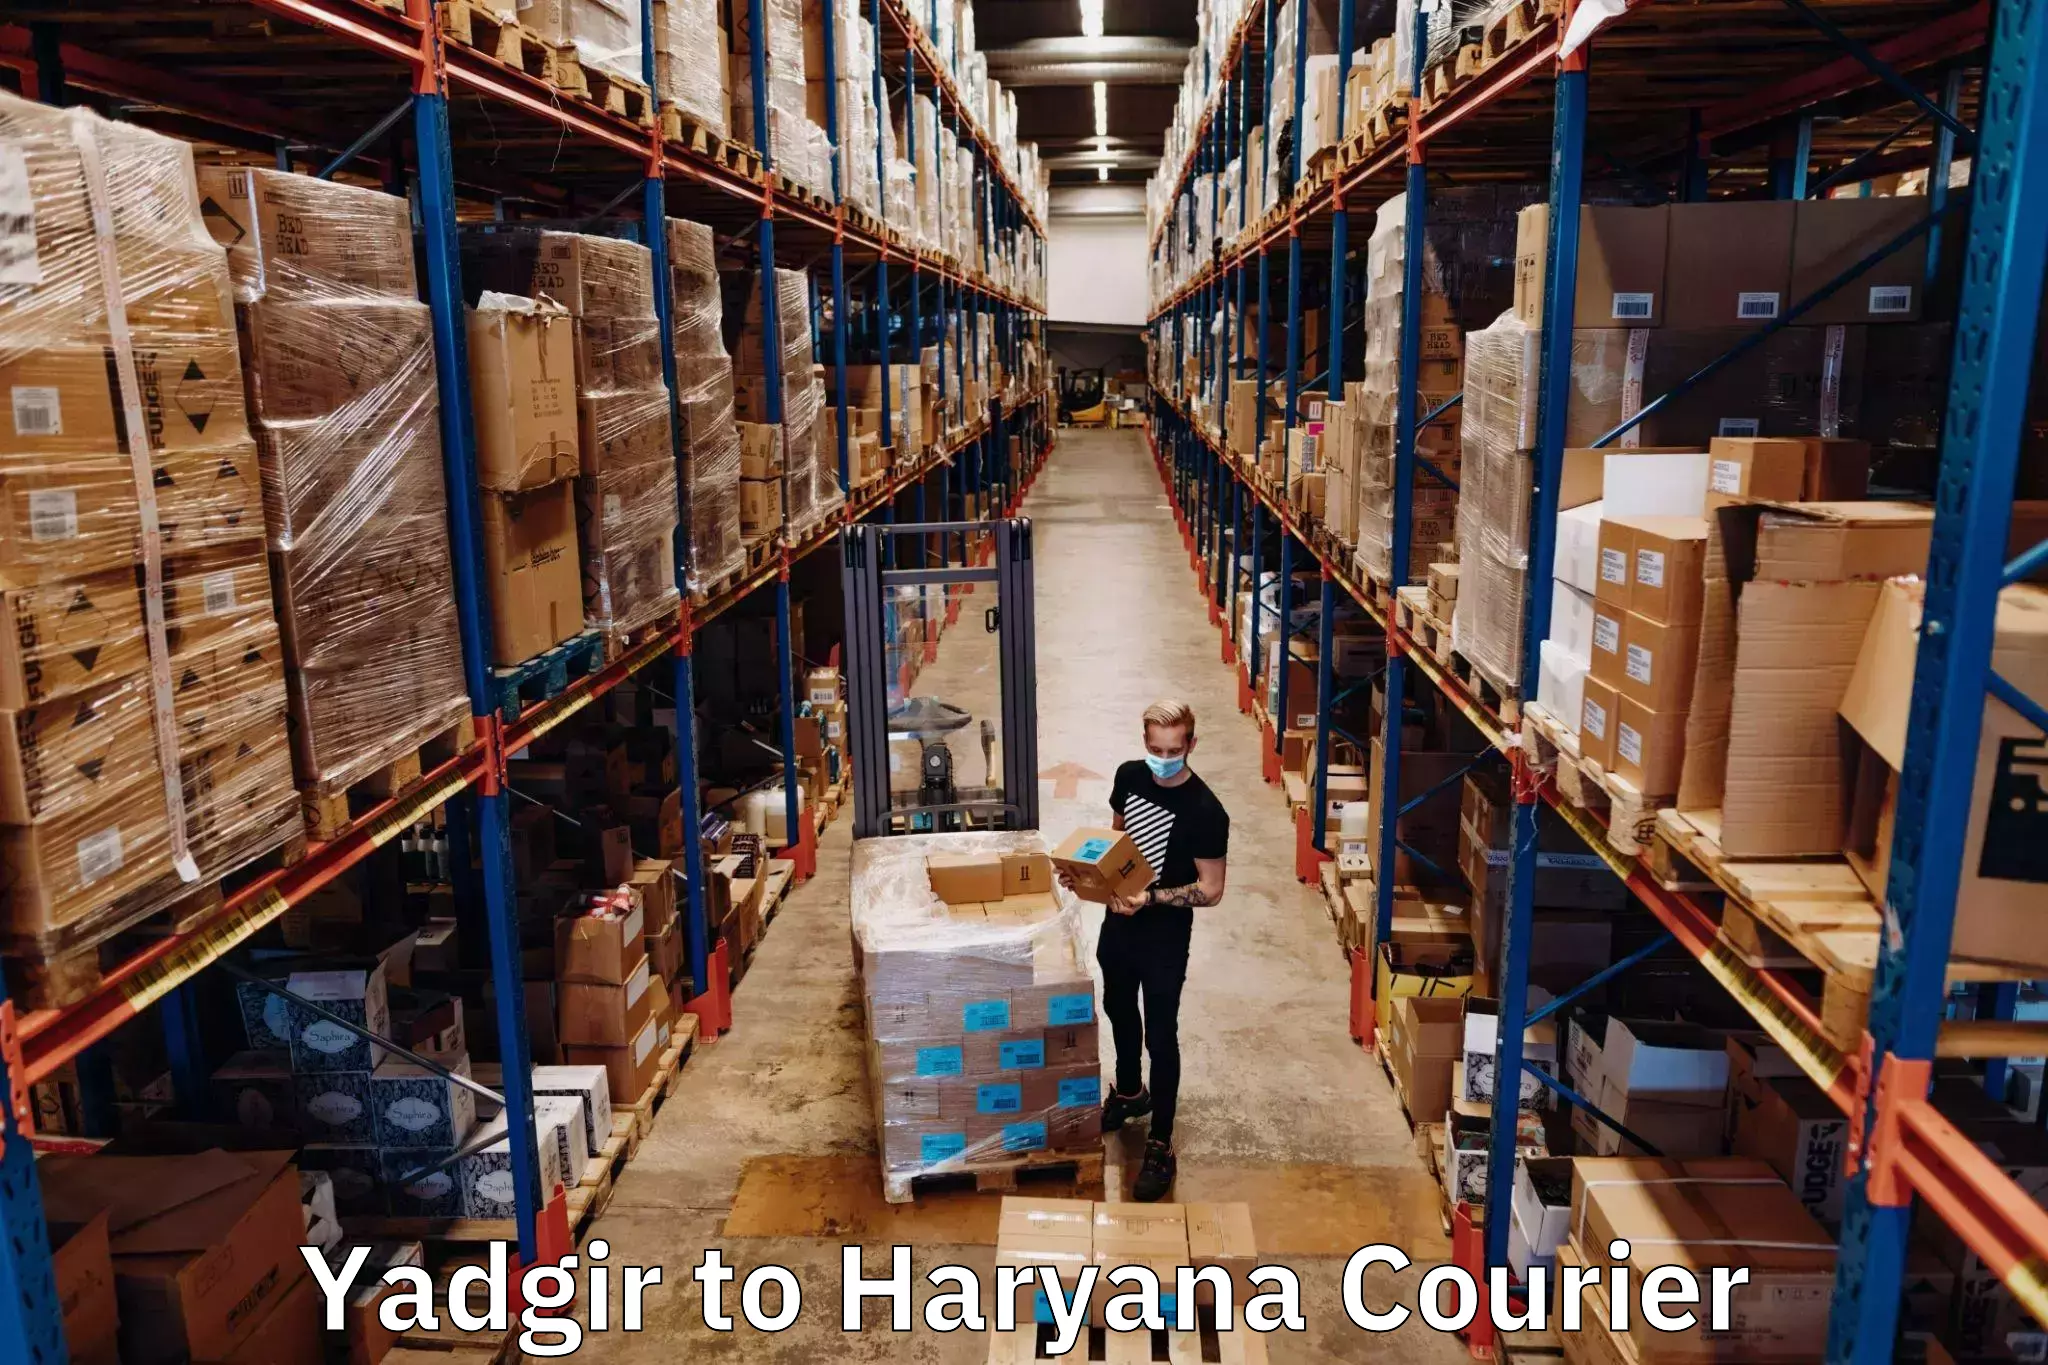 Courier service booking Yadgir to Dharuhera